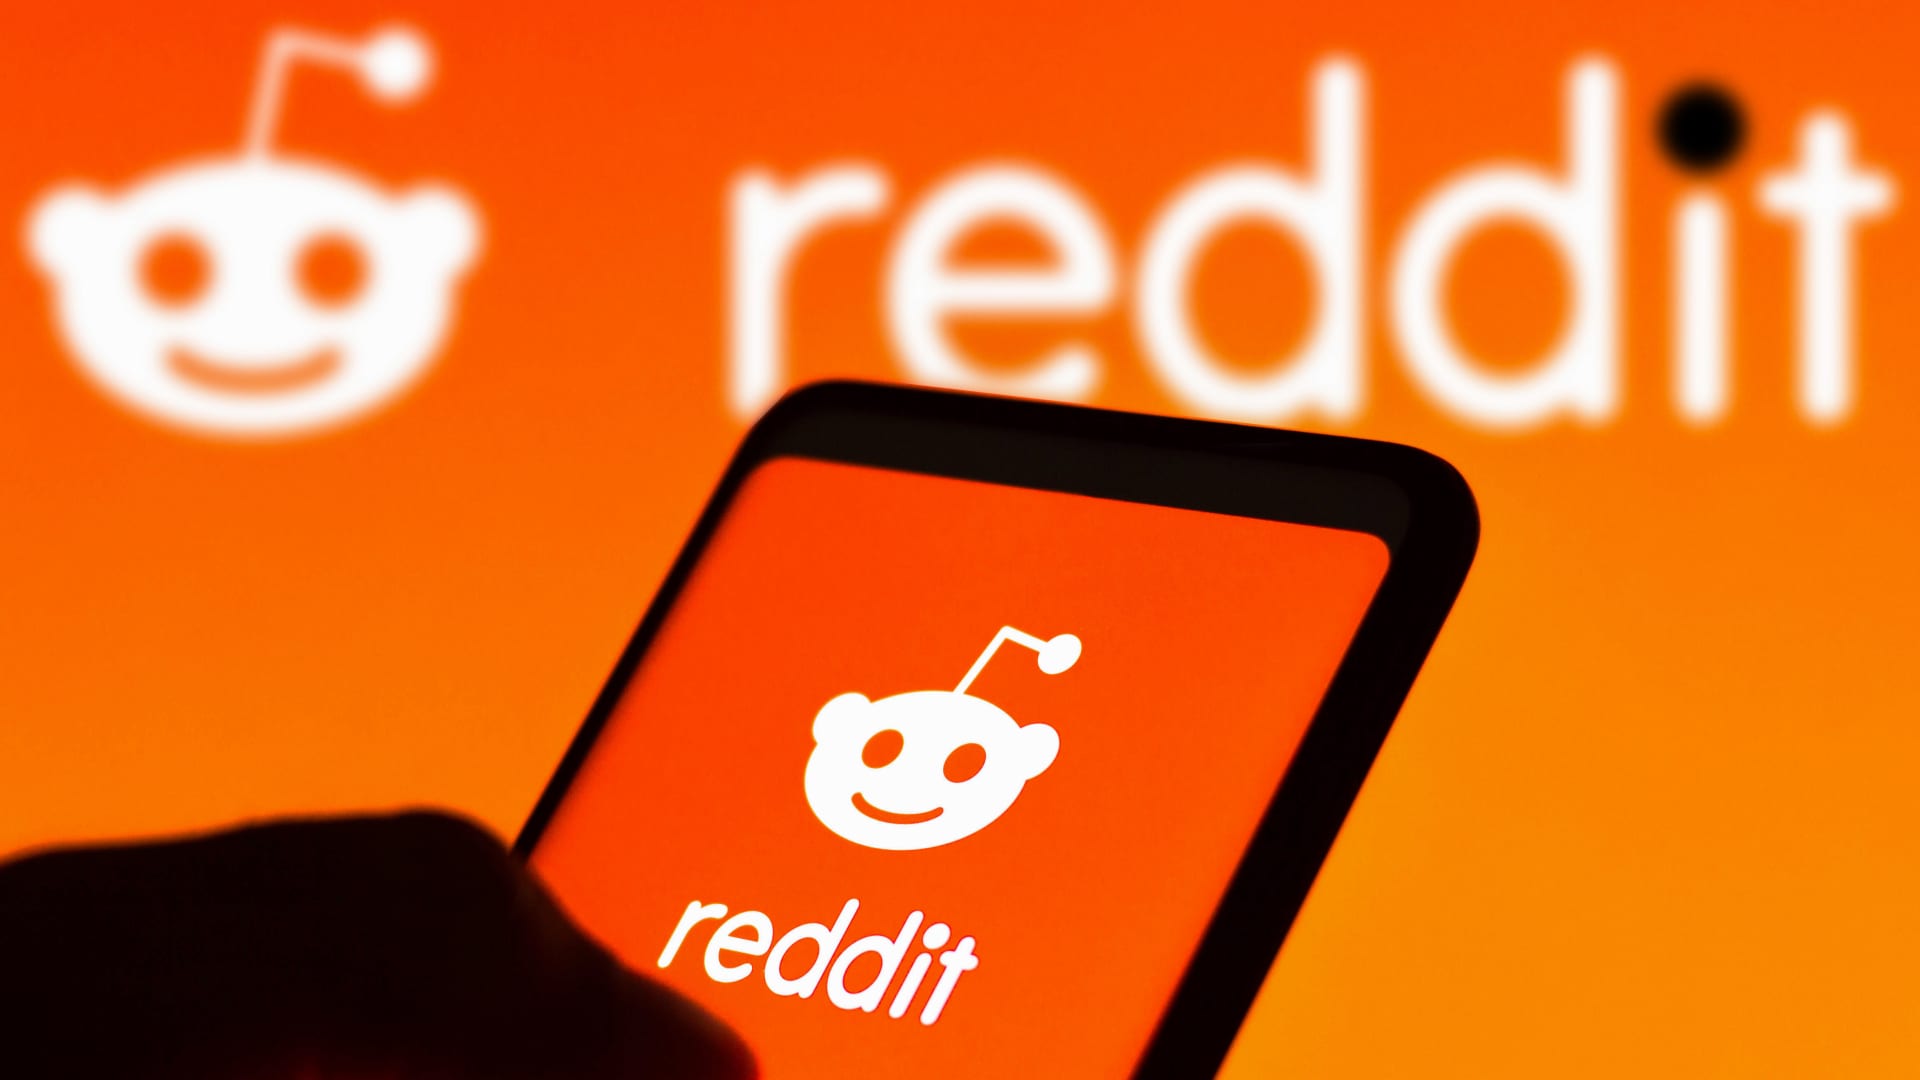 Reddit is in crisis as prominent moderators loudly protest the company's treatment of developers